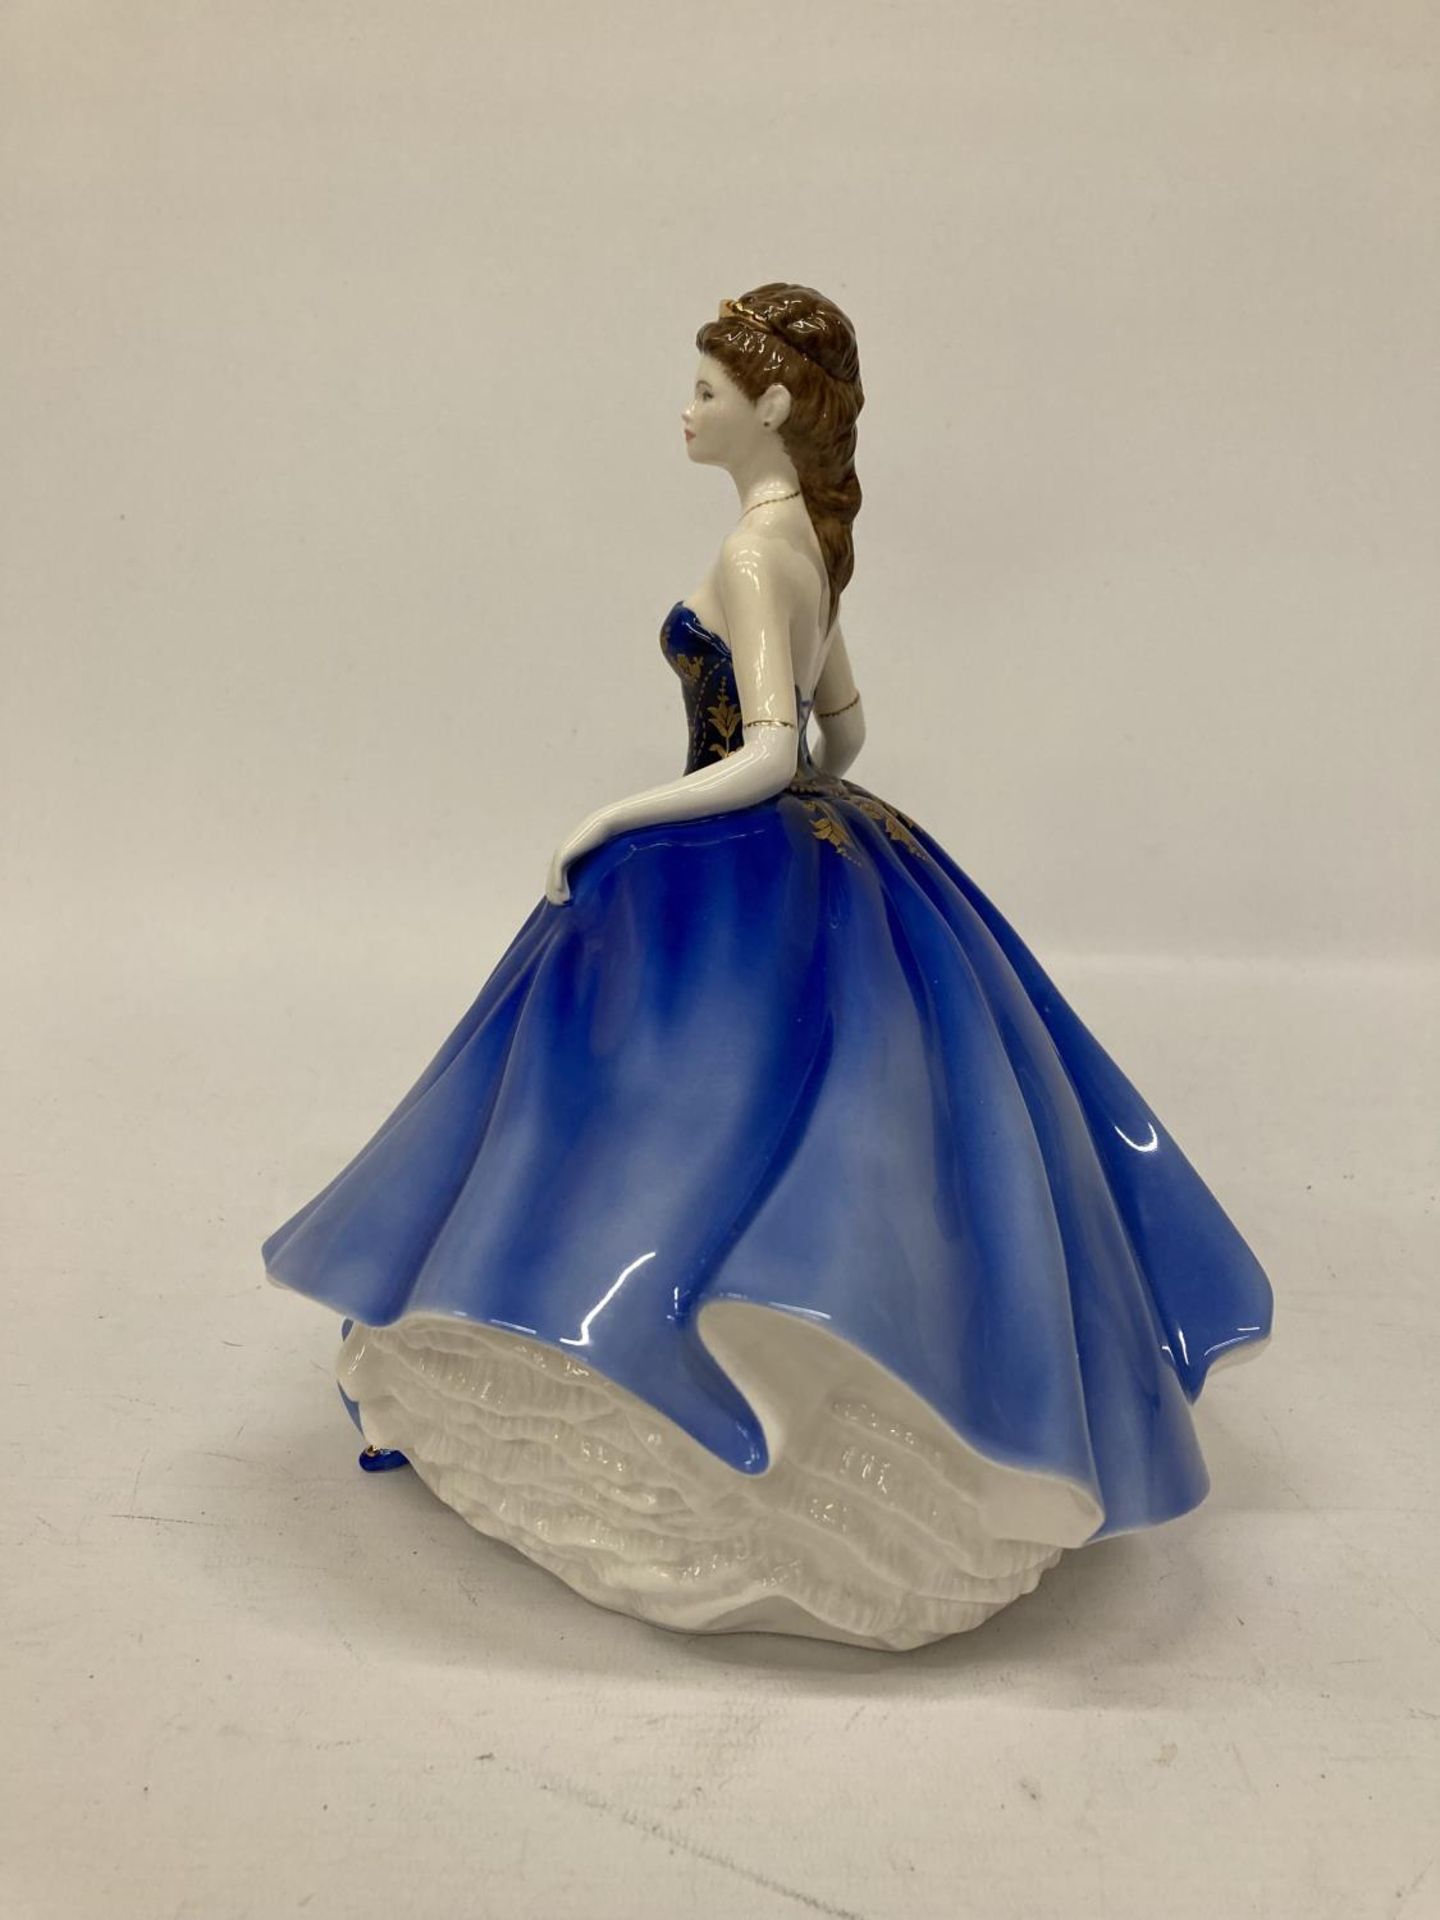 A ROYAL DOULTON FIGURINE FROM THE CLASSICS COLLECTION "ABIGAIL" LADY OF THE YEAR 2006 HN4824 - Image 4 of 5